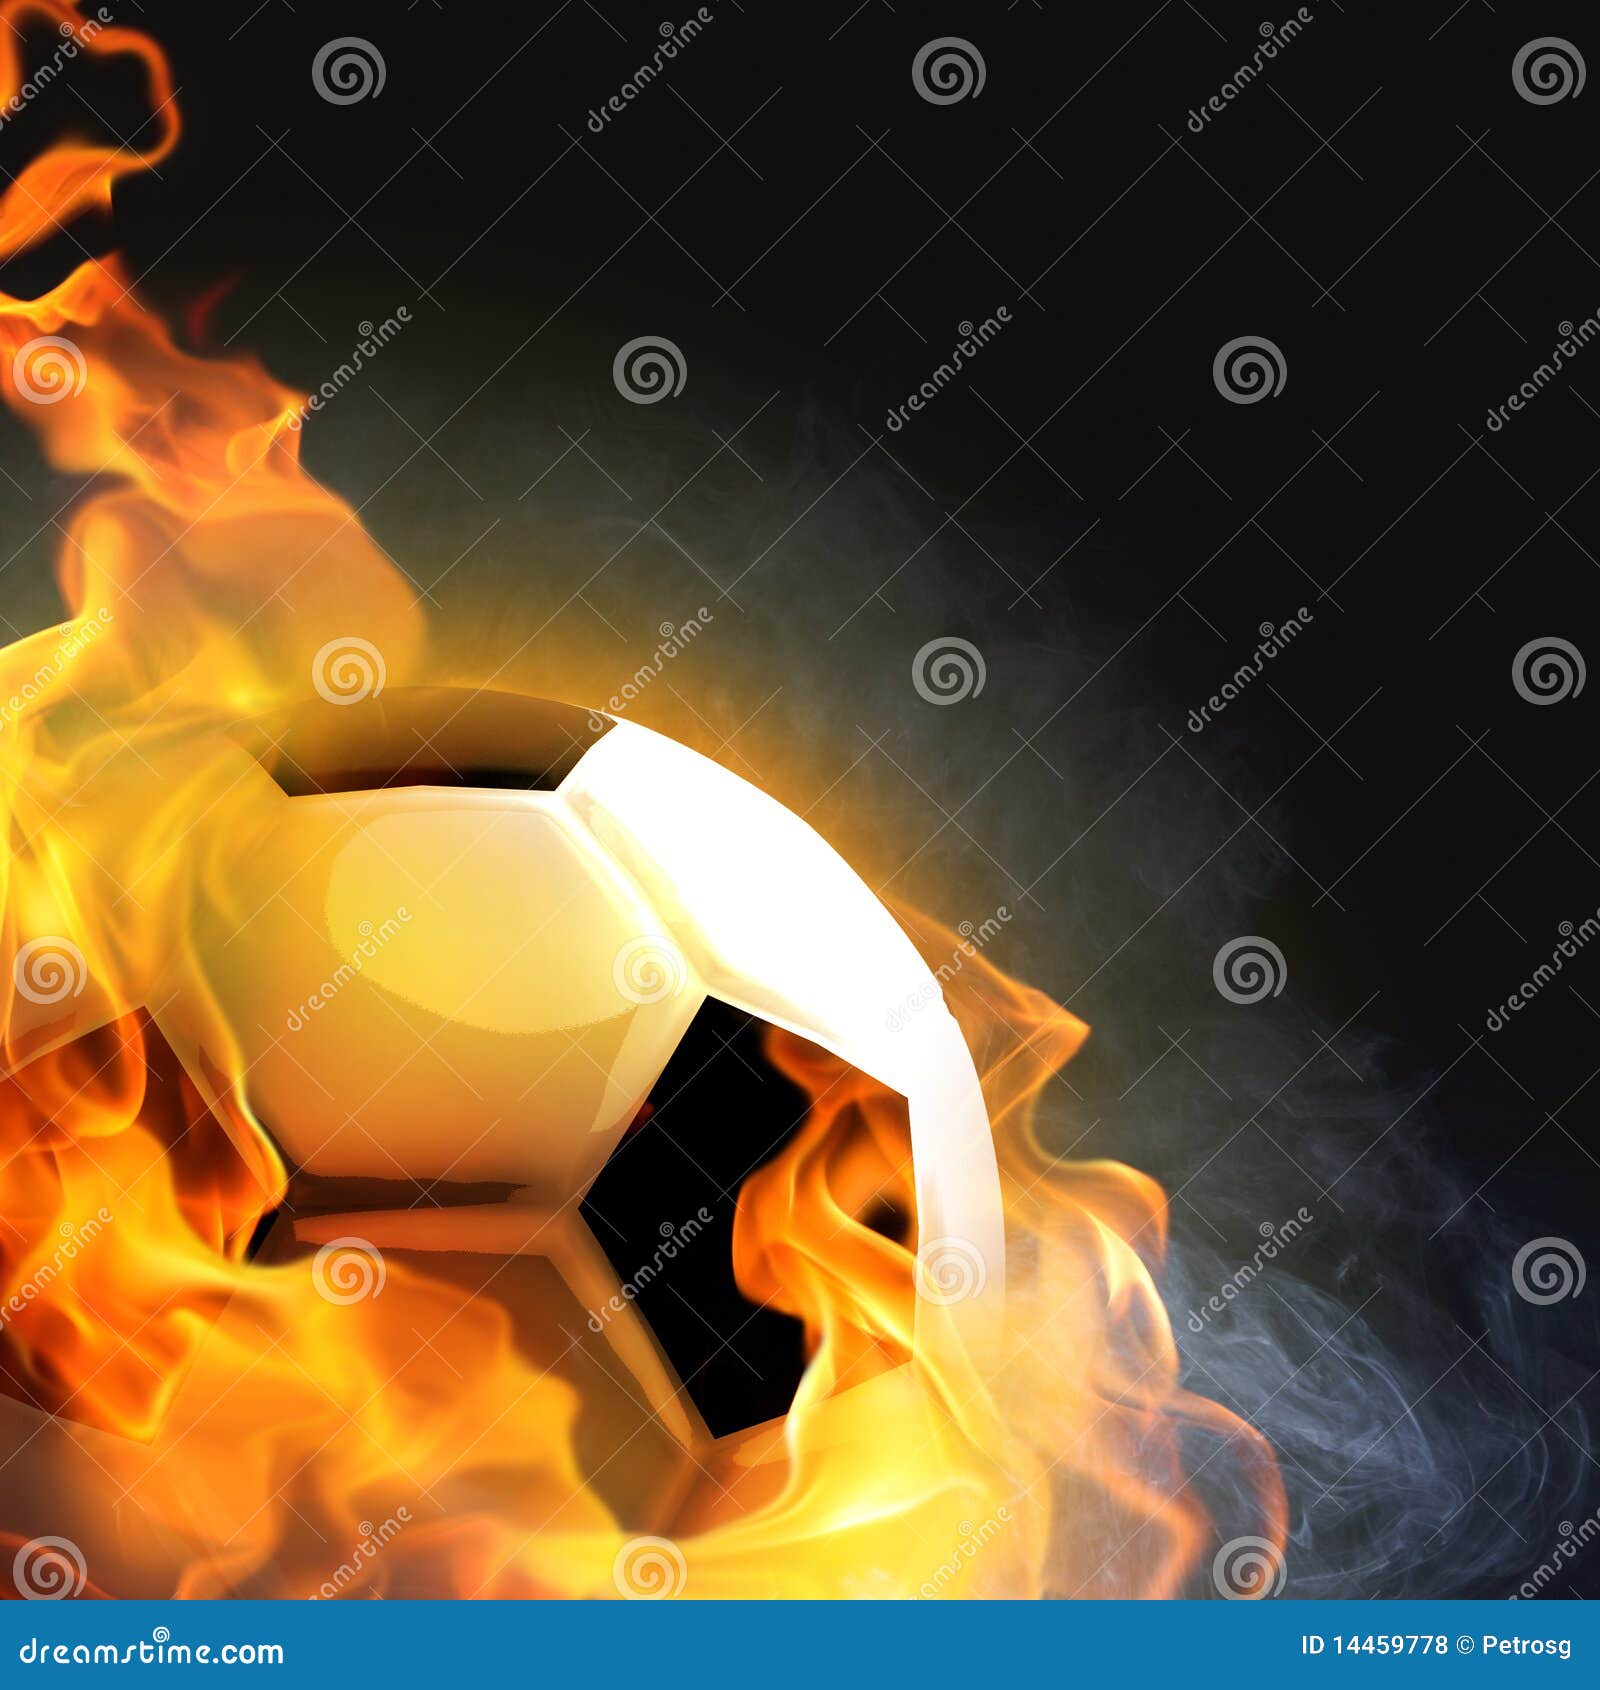 Background with a Soccer Ball and Fire Stock Vector - Illustration of ...